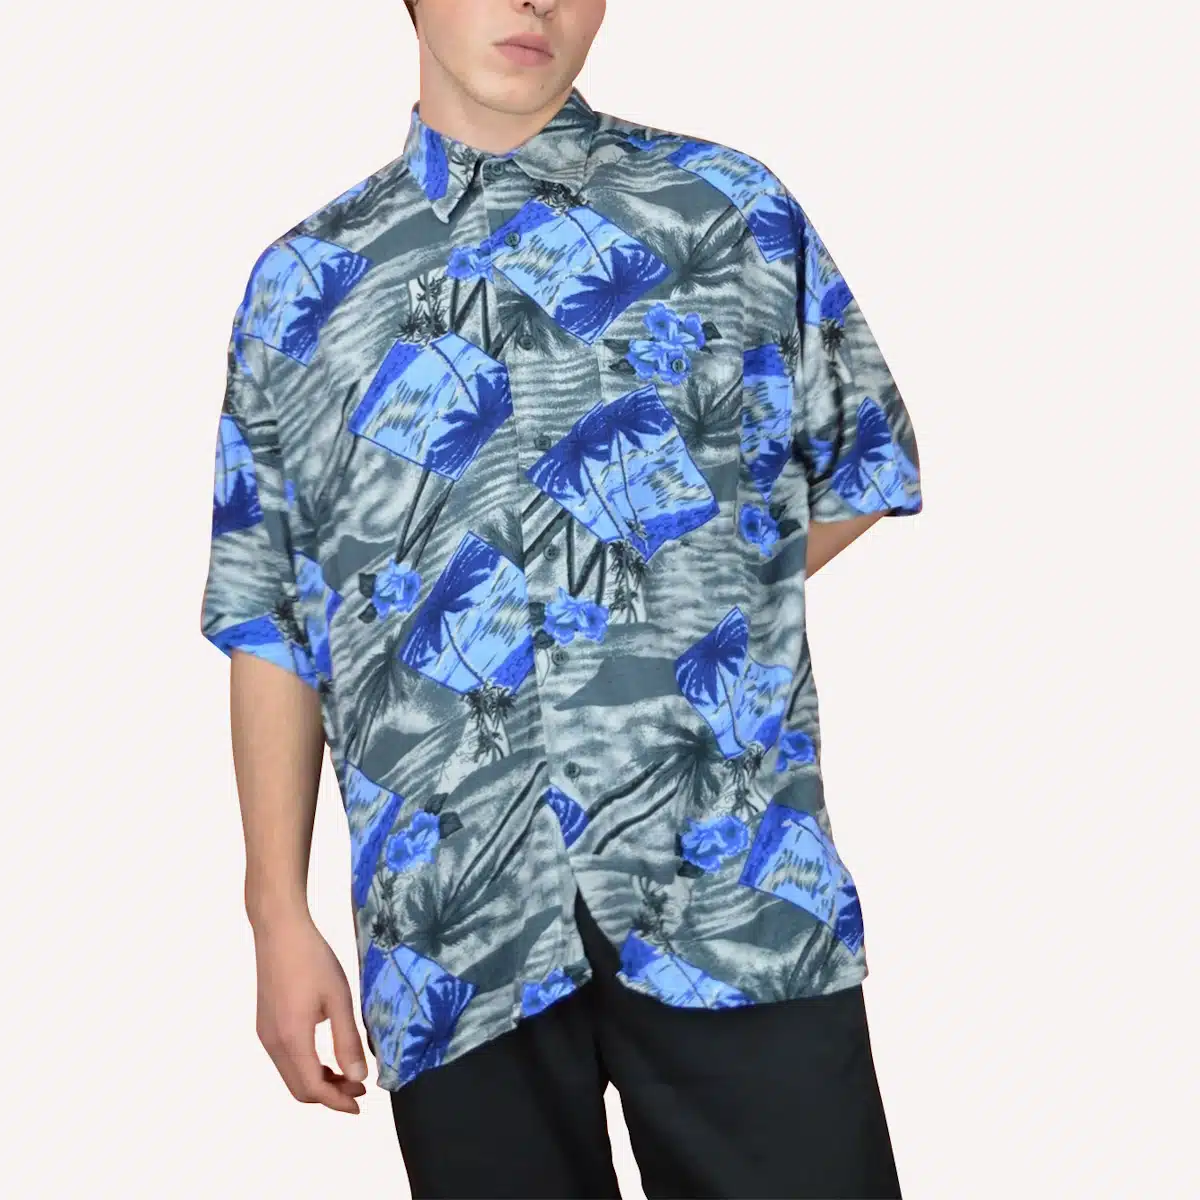 Hanger Vintage Graphic Abstract Print Shirt